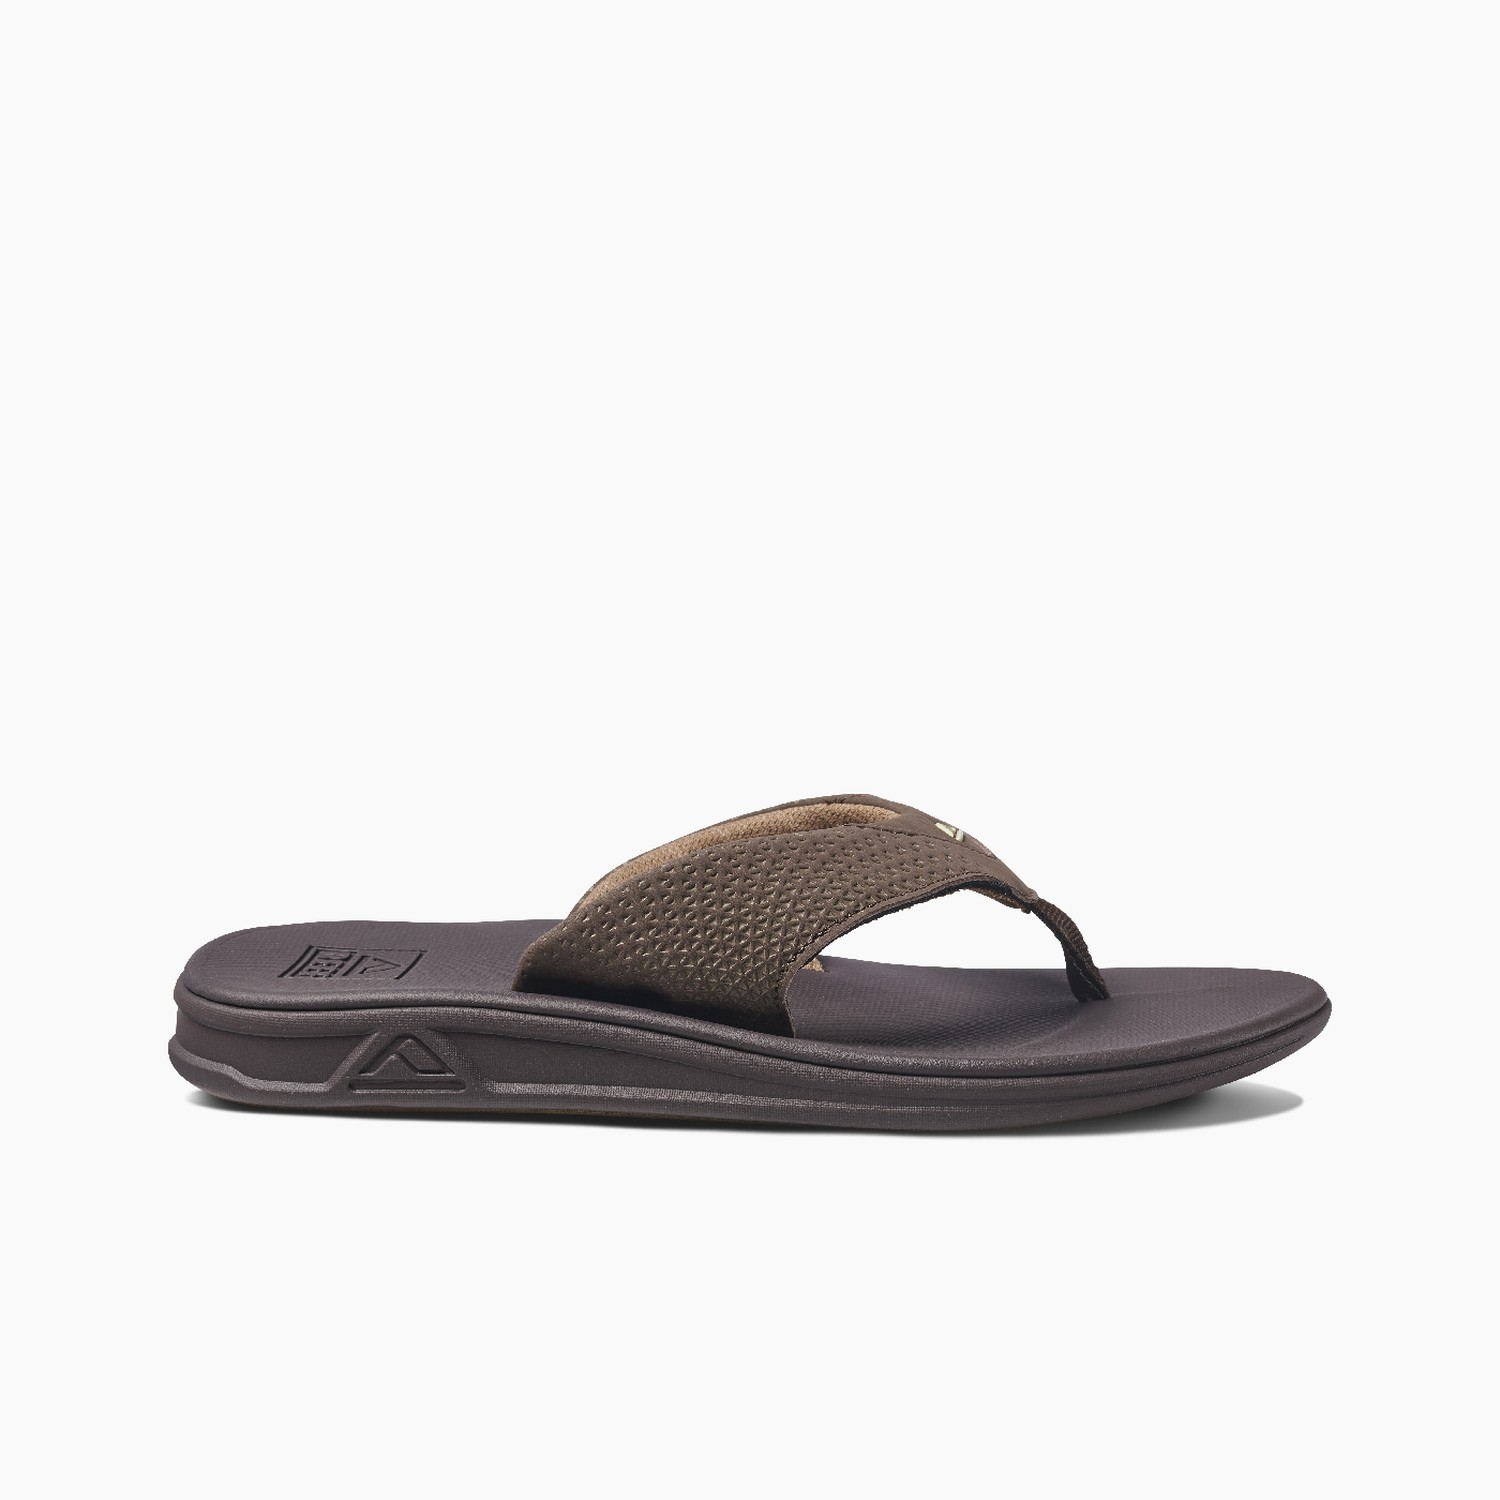 Reef Rover Men's Sandals - Free Shipping